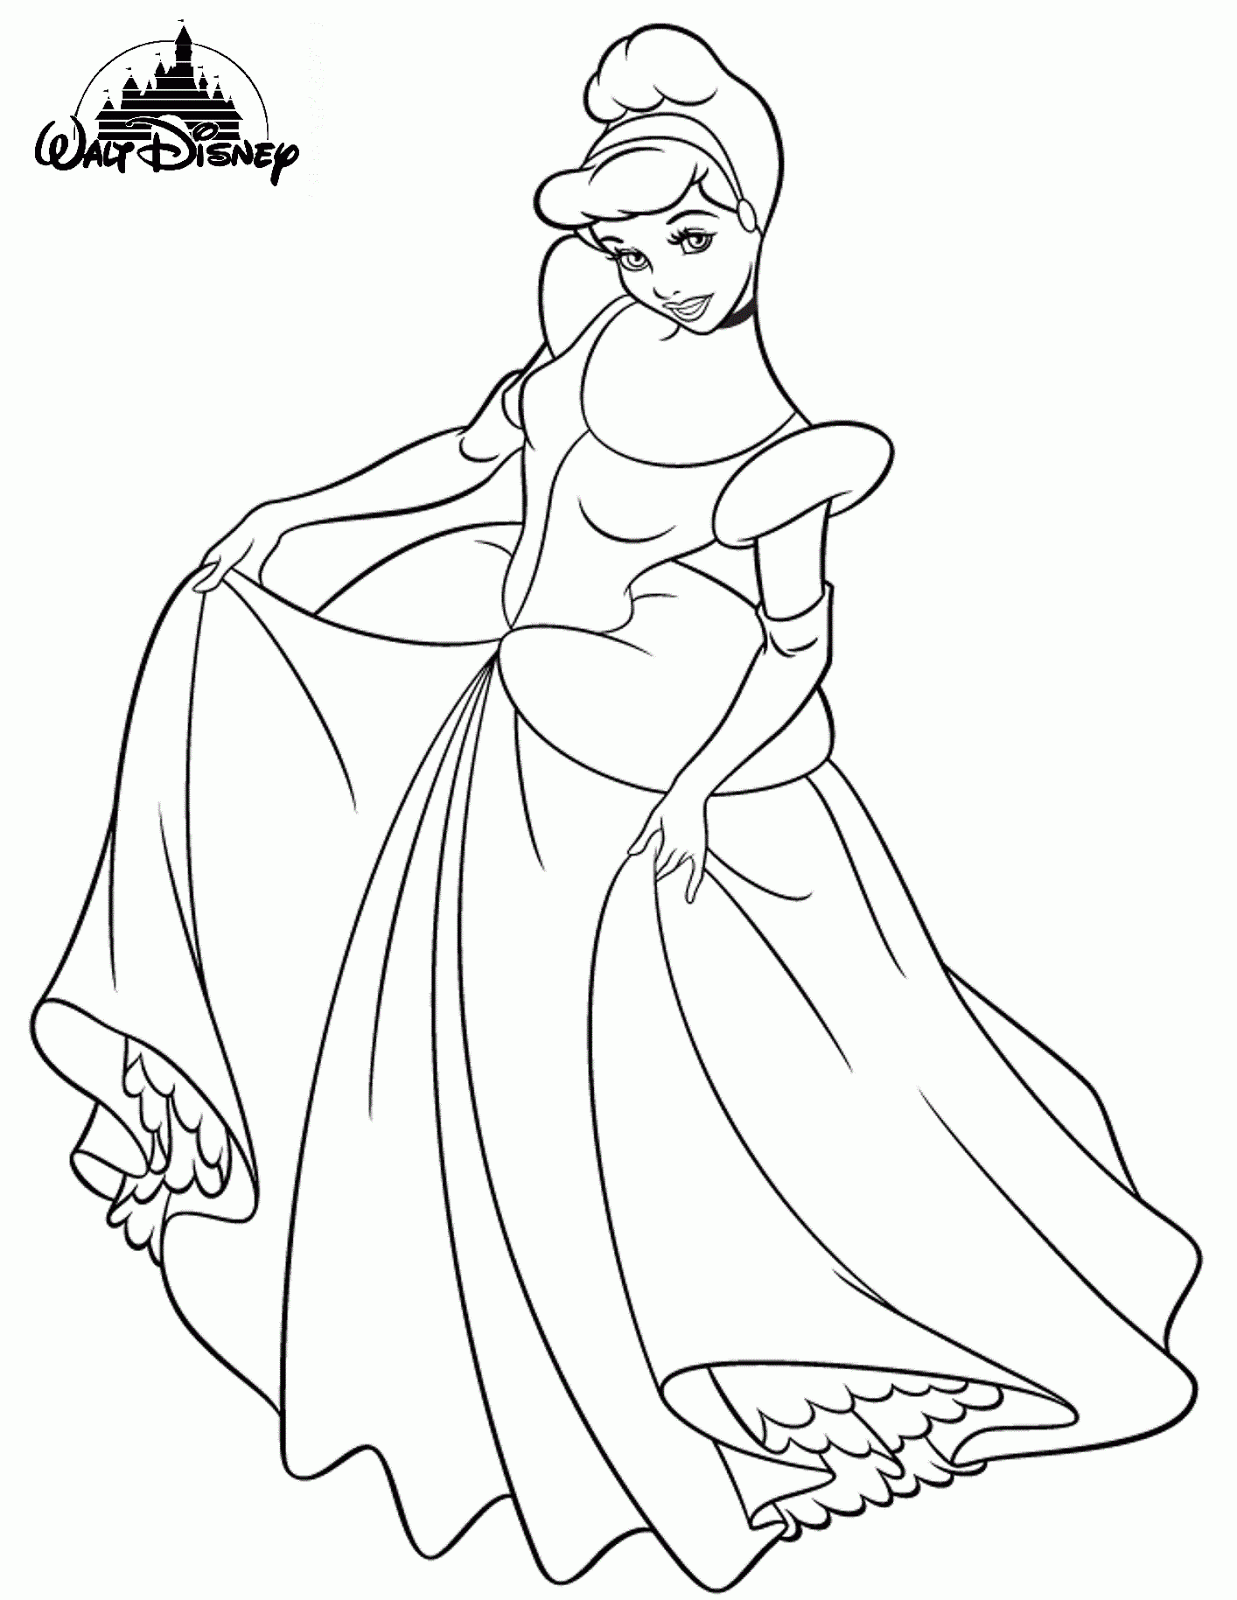 Belle Ariel And Cinderella Coloring Pages   Coloring Home